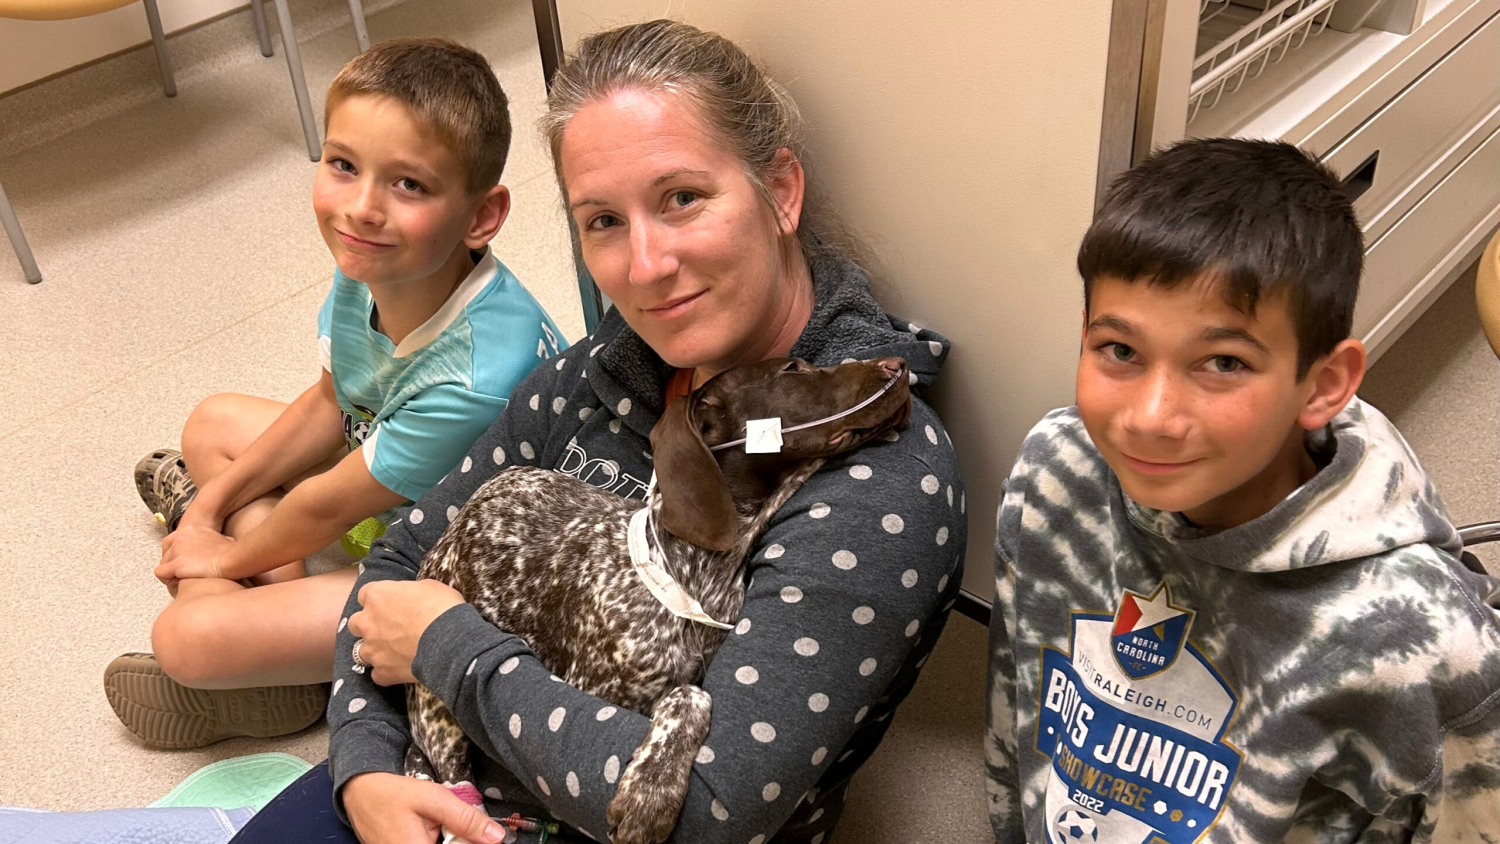 A woman holding a brown-and-white speckled German shorthaired pointer puppy fitted with a nasogastric feeding tube sits between her two young sons on the floor of a veterinary hospital.